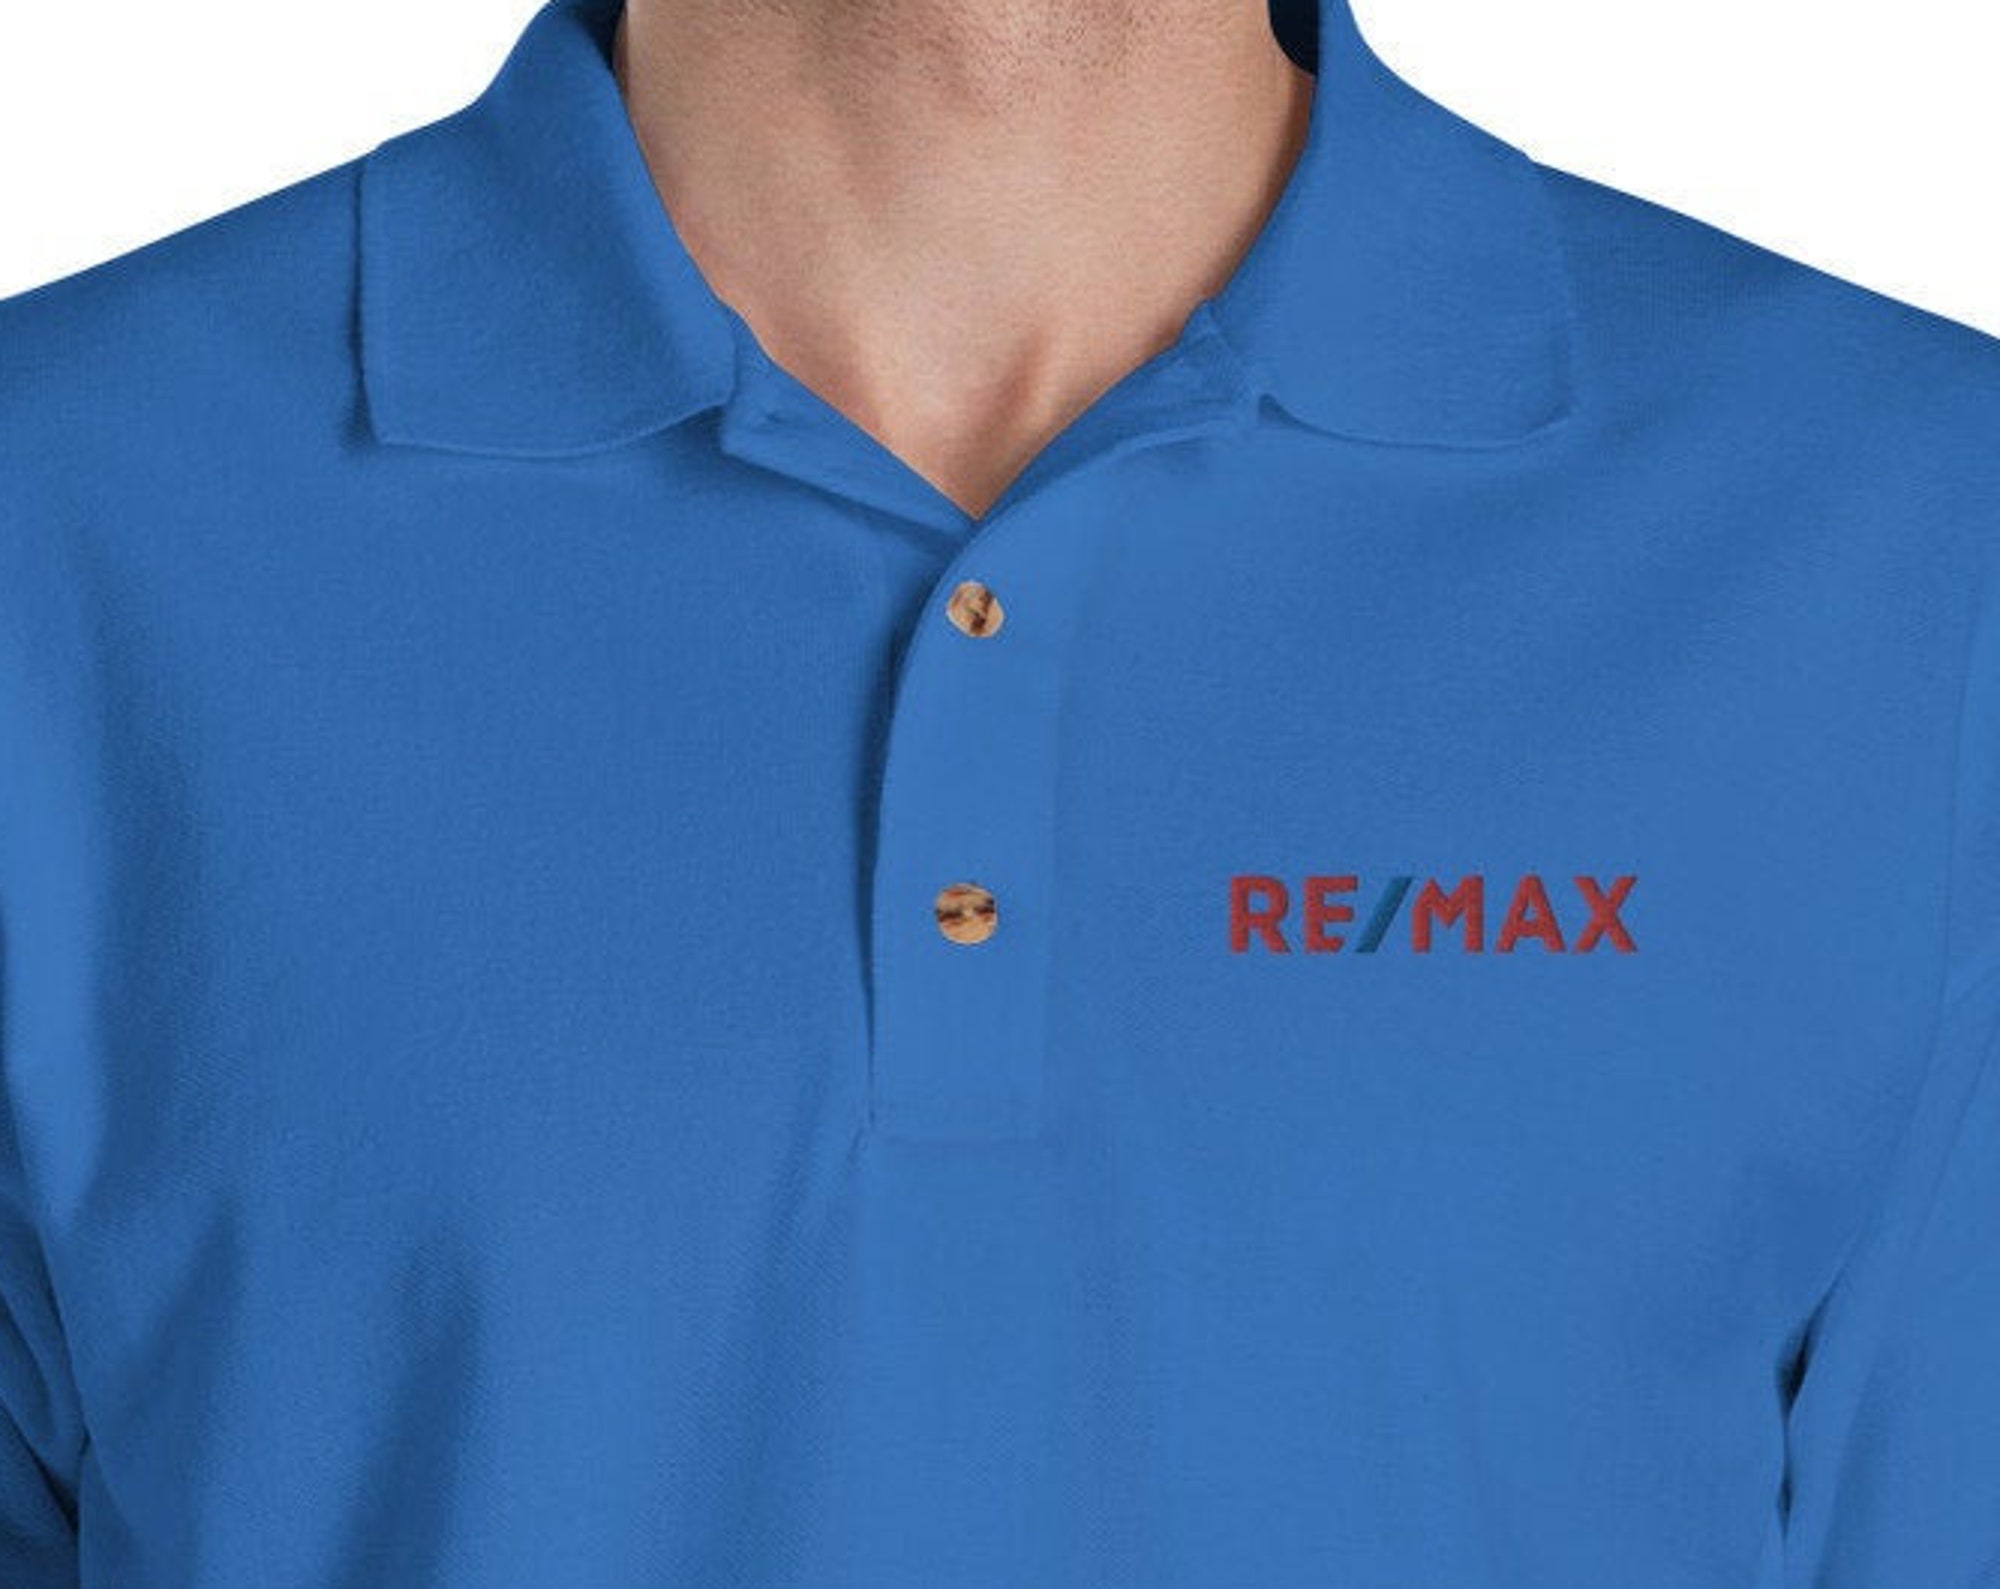 Discover Remax Tee - Embroidered Polo Shirt